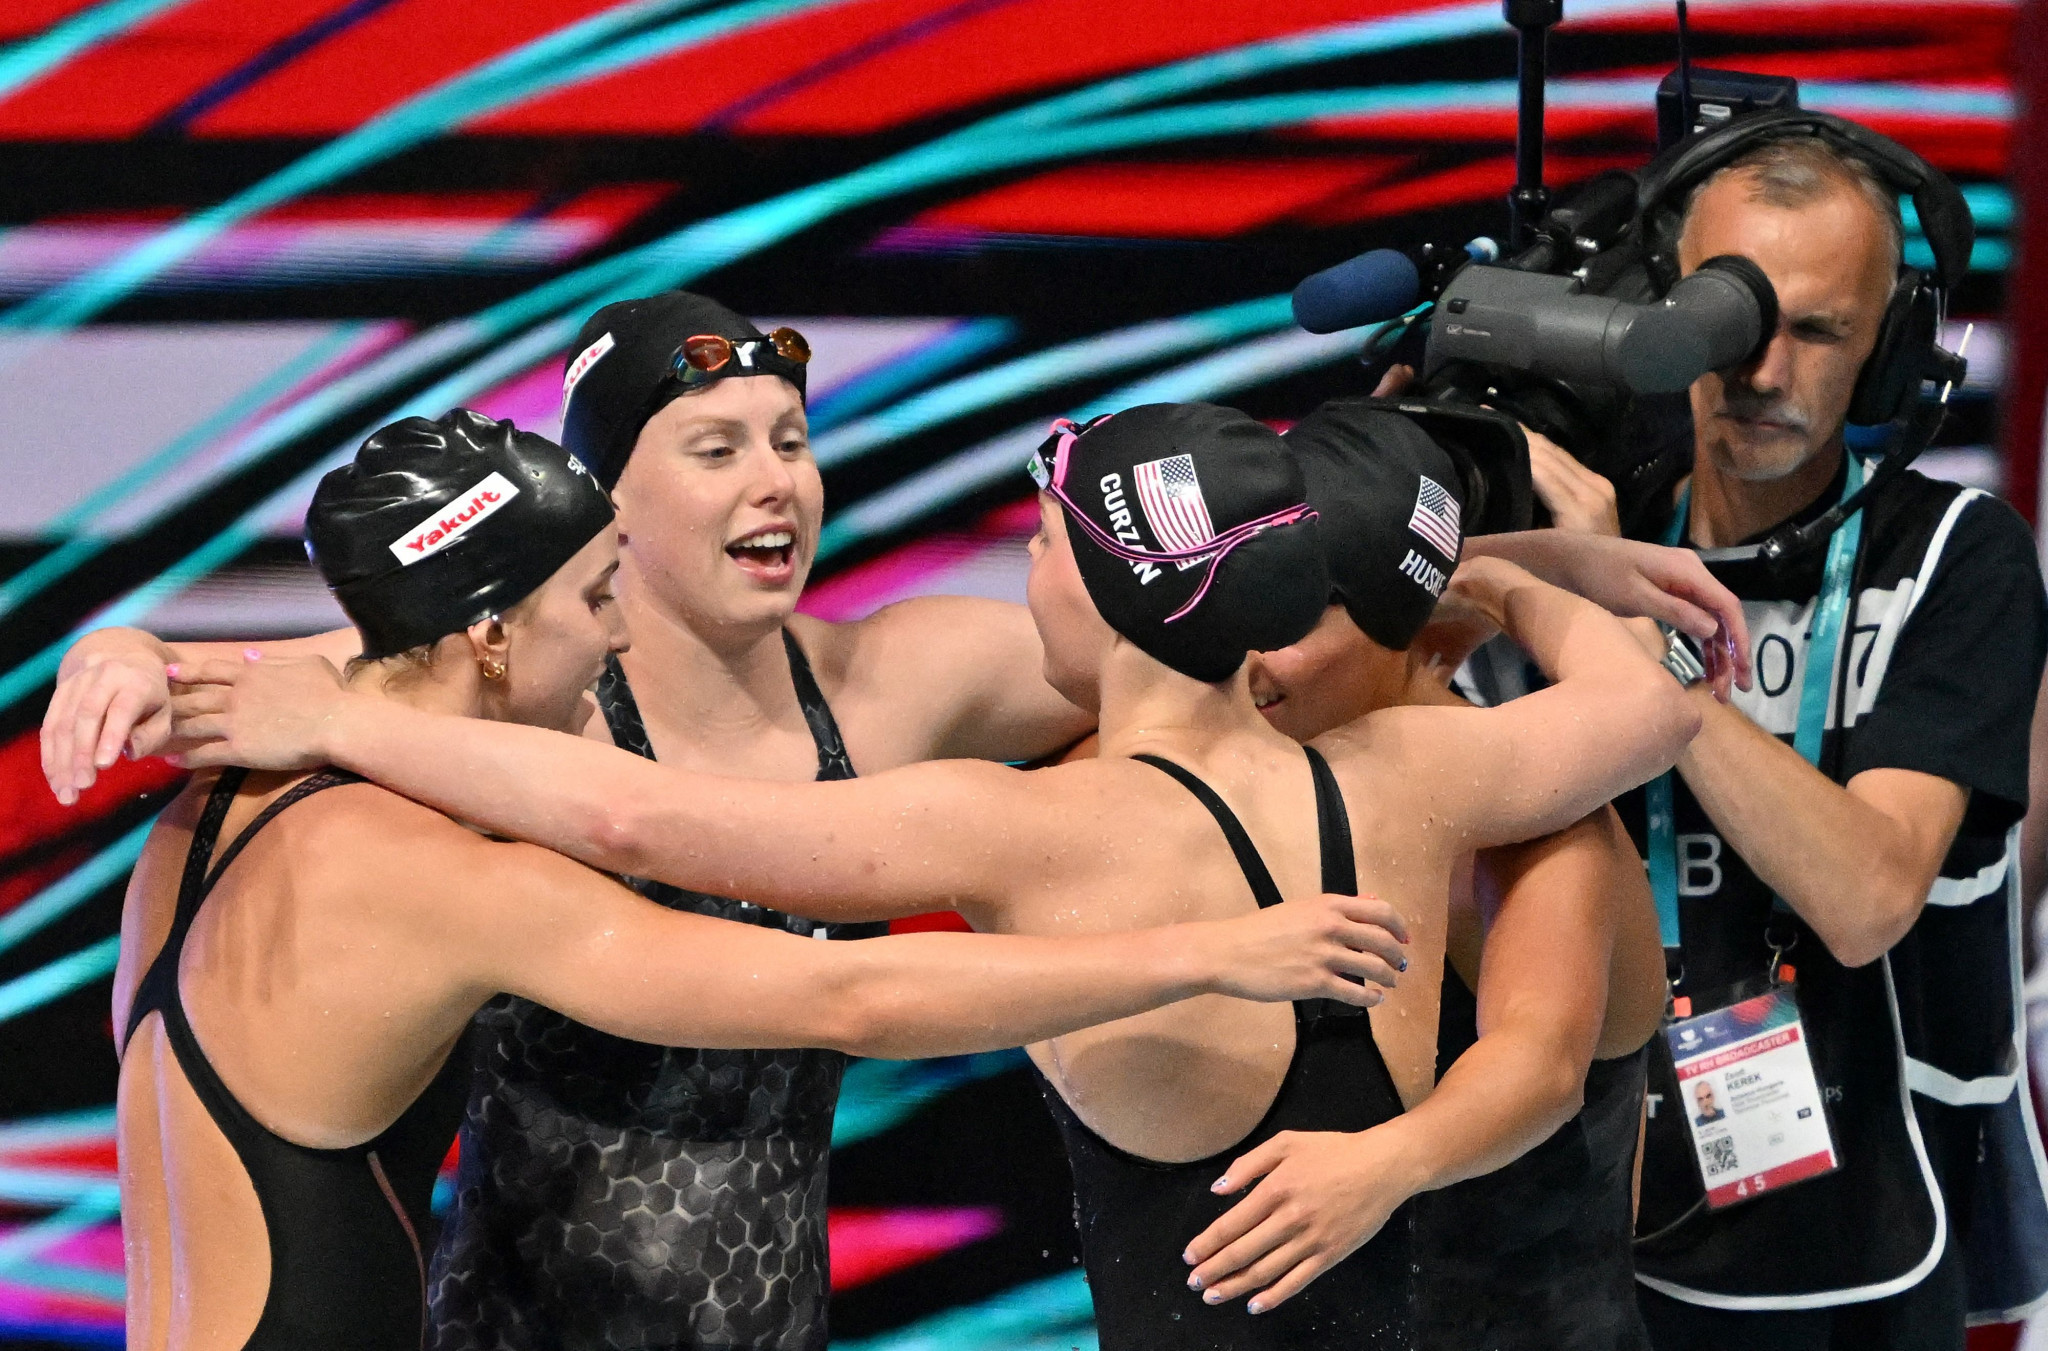 The US clinched their 17th swimming gold medal in Budapest in the women's 4x100m medley relay ©Getty Images